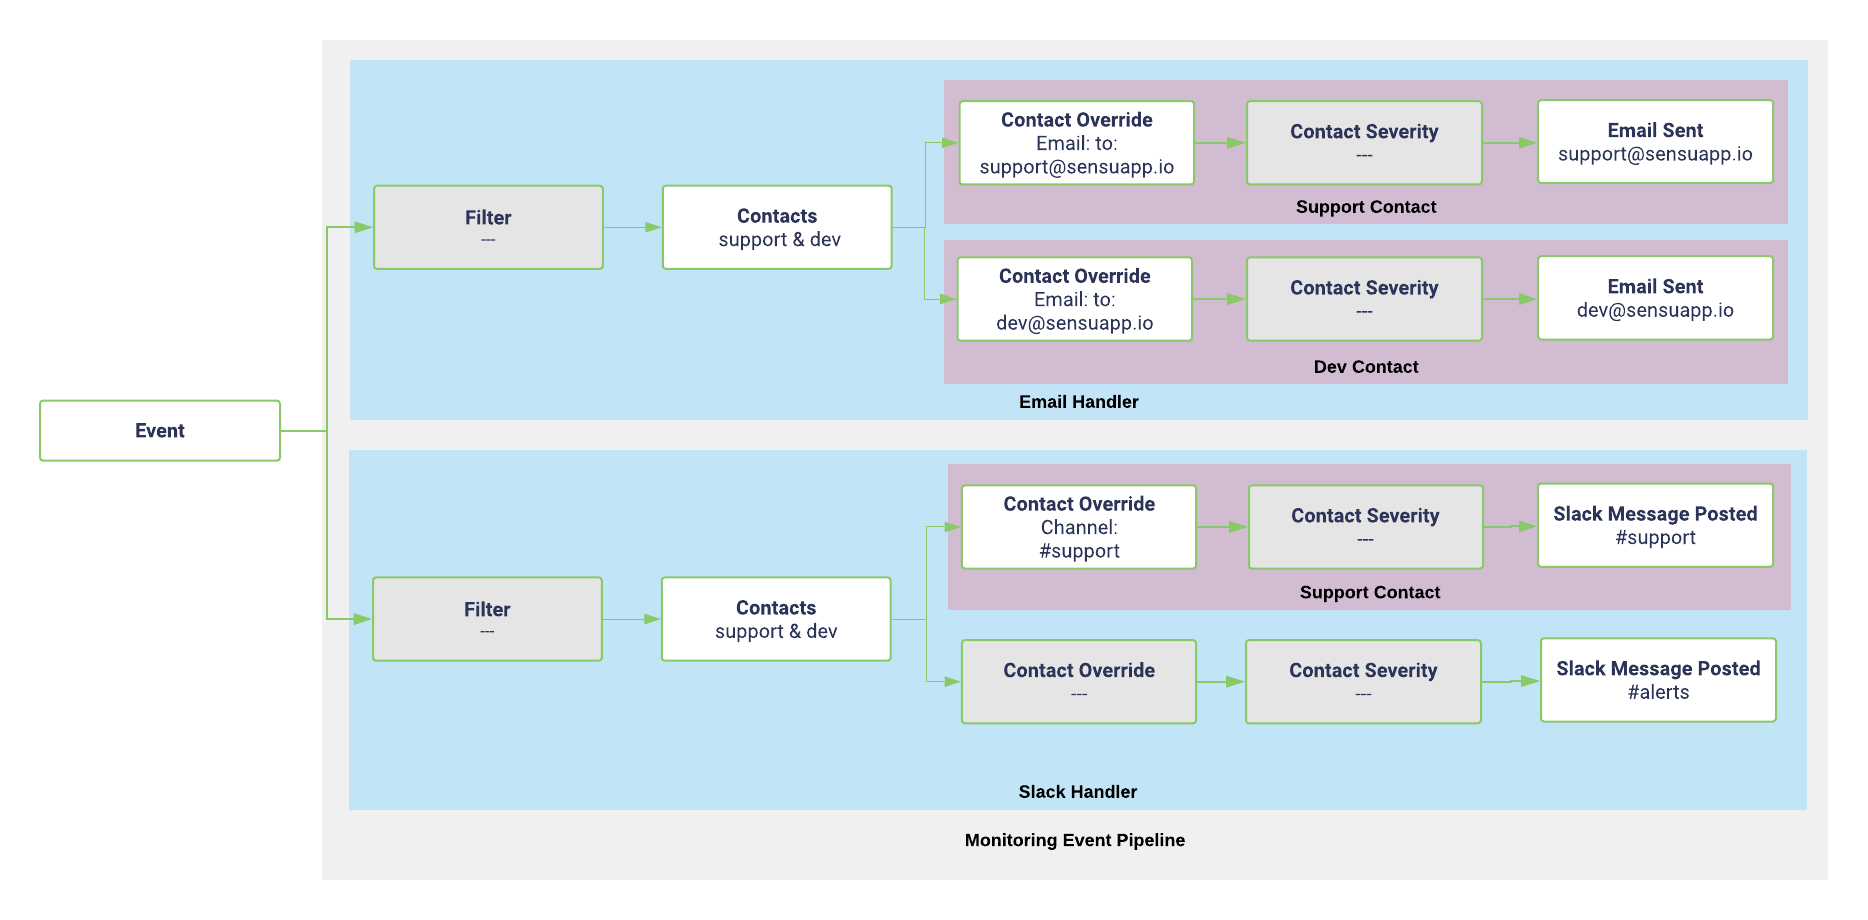 Contact routing and the Sensu monitoring event pipeline